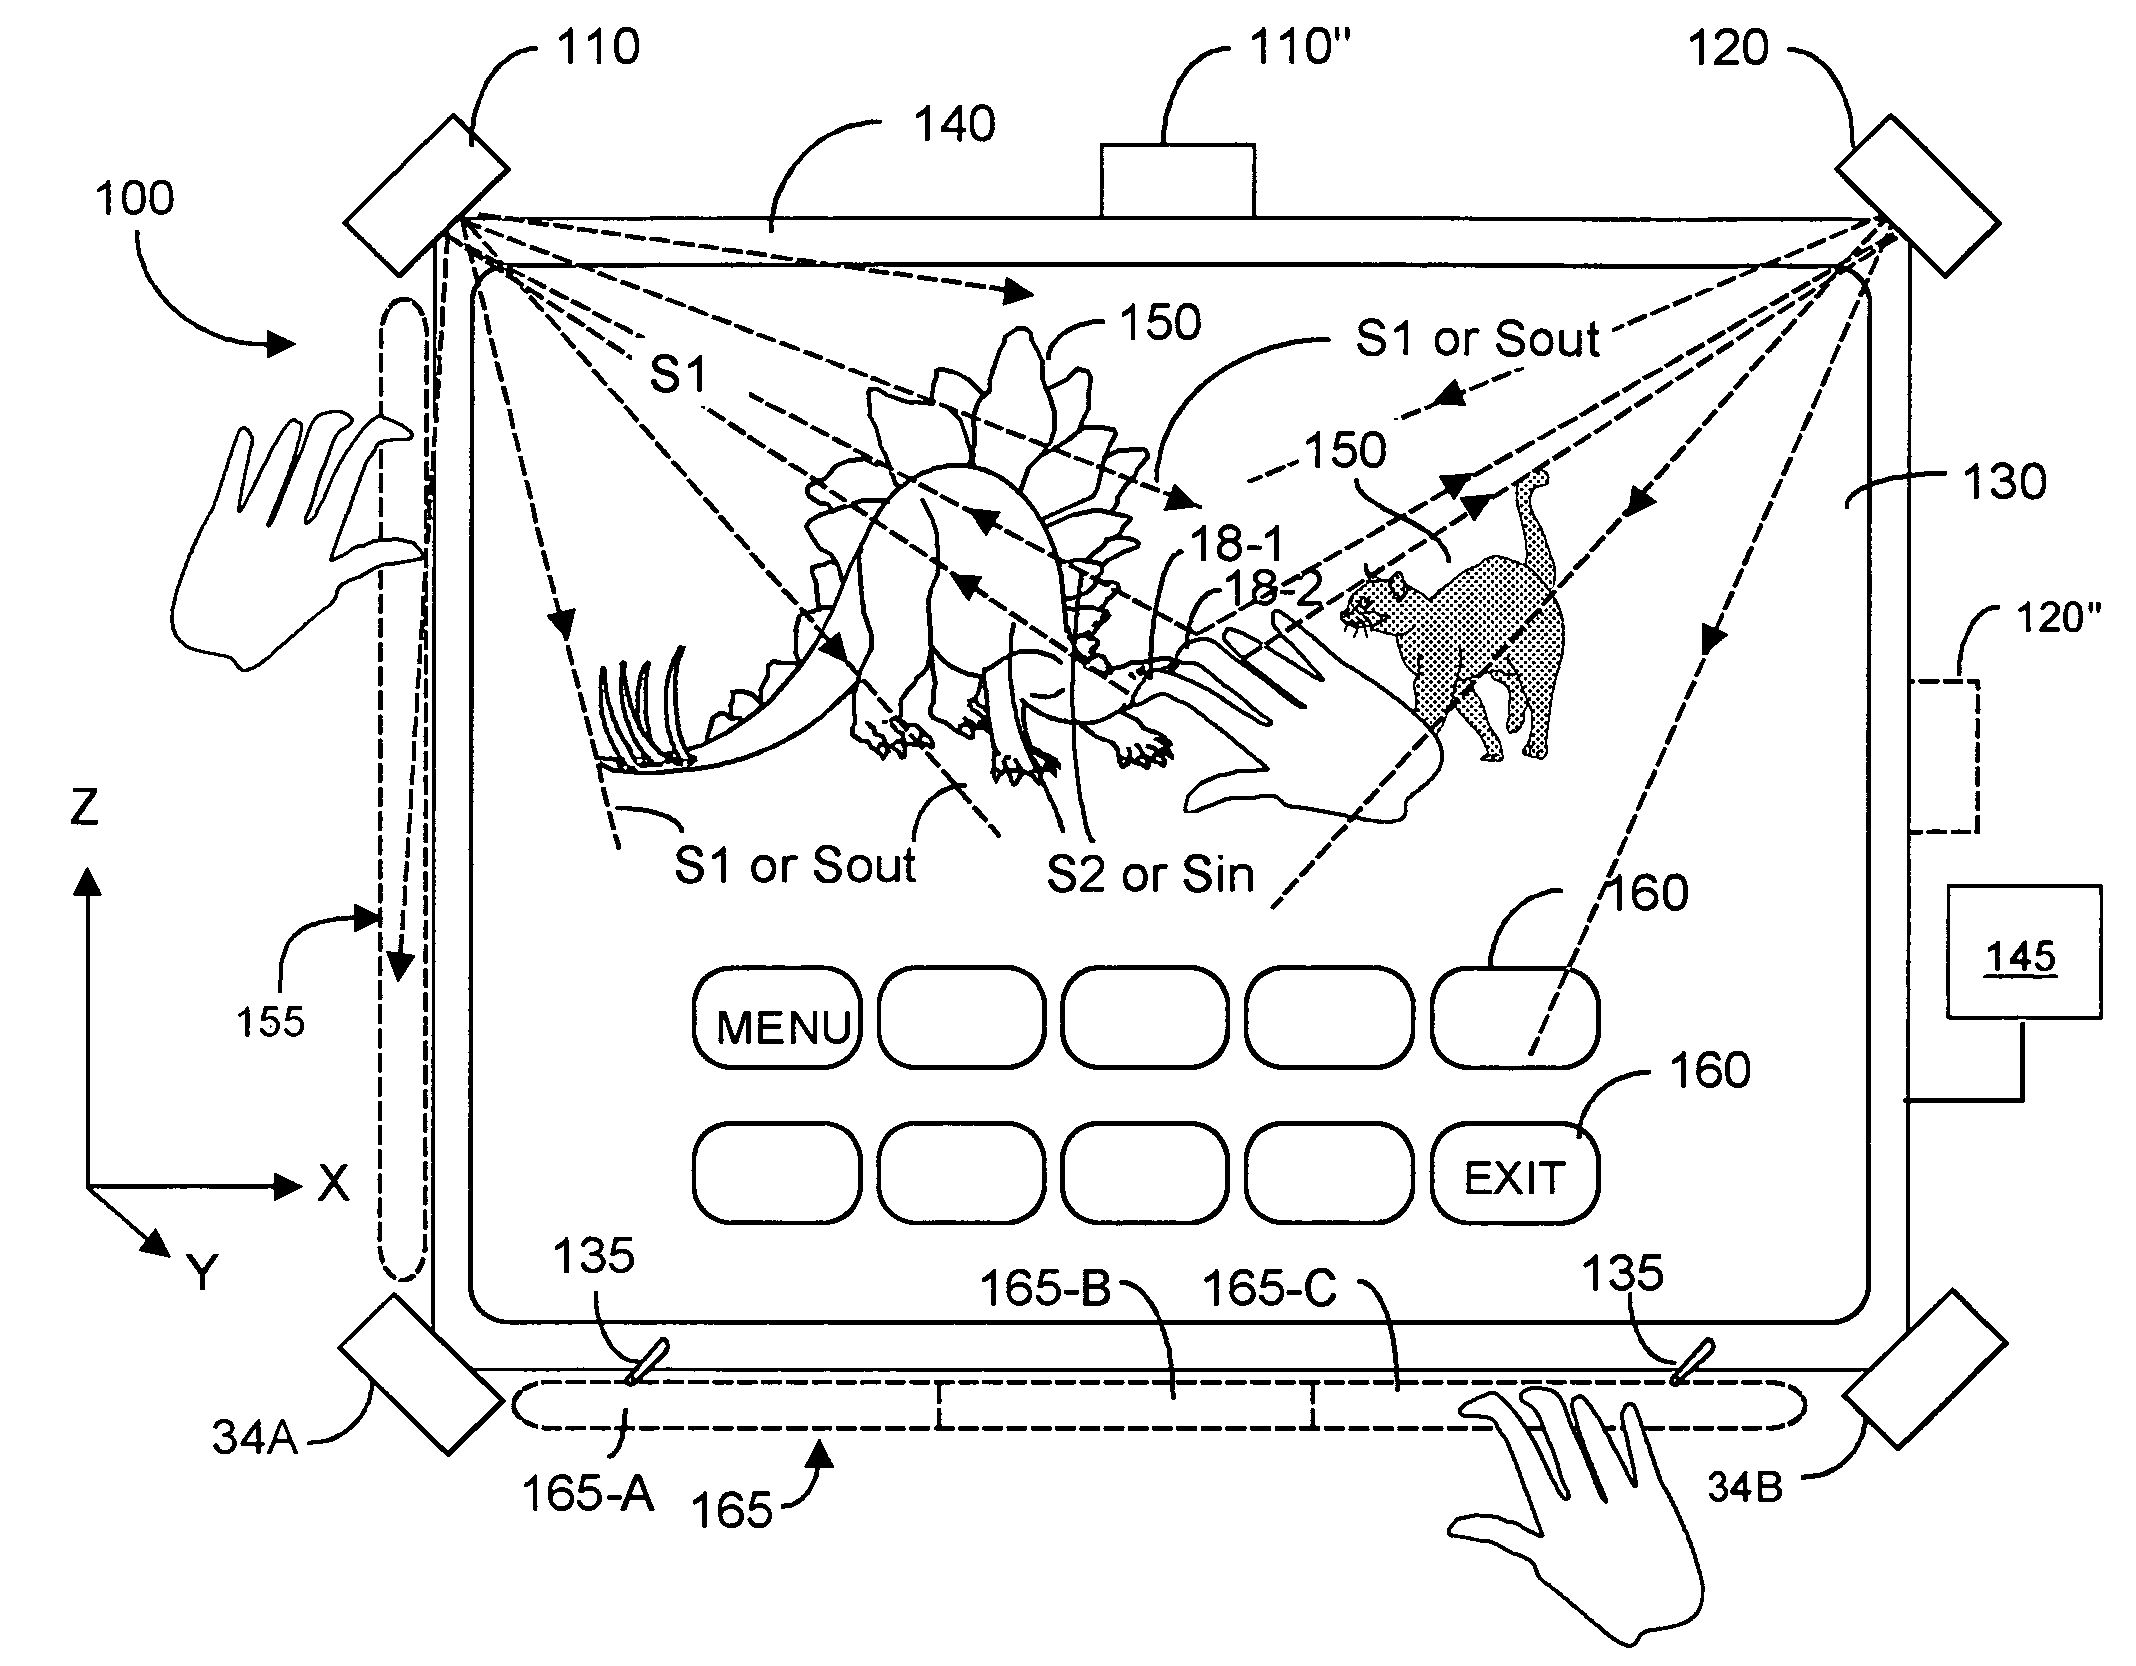 Method and system for recognition of user gesture interaction with passive surface video displays